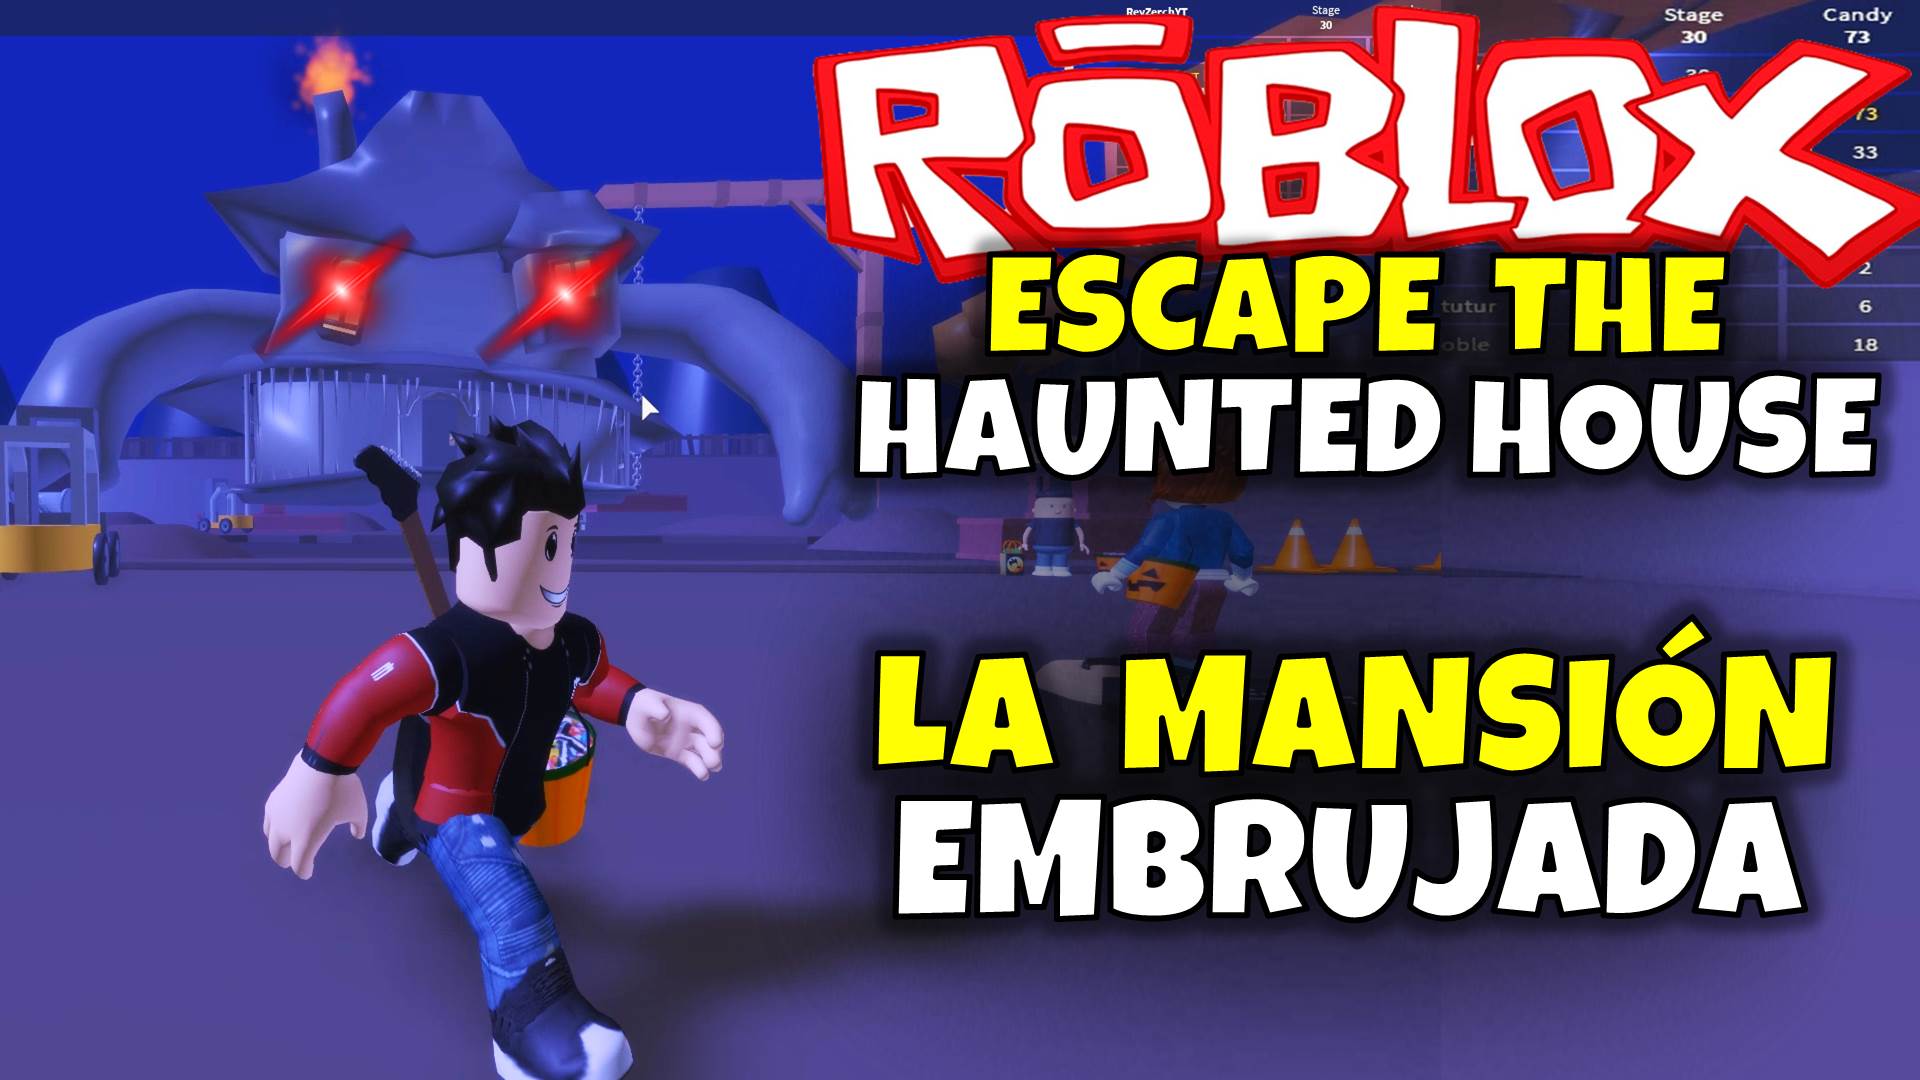 Rey Zerch On Twitter Escape De La Mansion Embrujada Roblox New Escape The Haunted House Obby Https T Co Igolz7jy3o Roblox Youtube Gameplay Halloween Escape Mansion Obby Https T Co Oetycy7eop - the mansion obby roblox